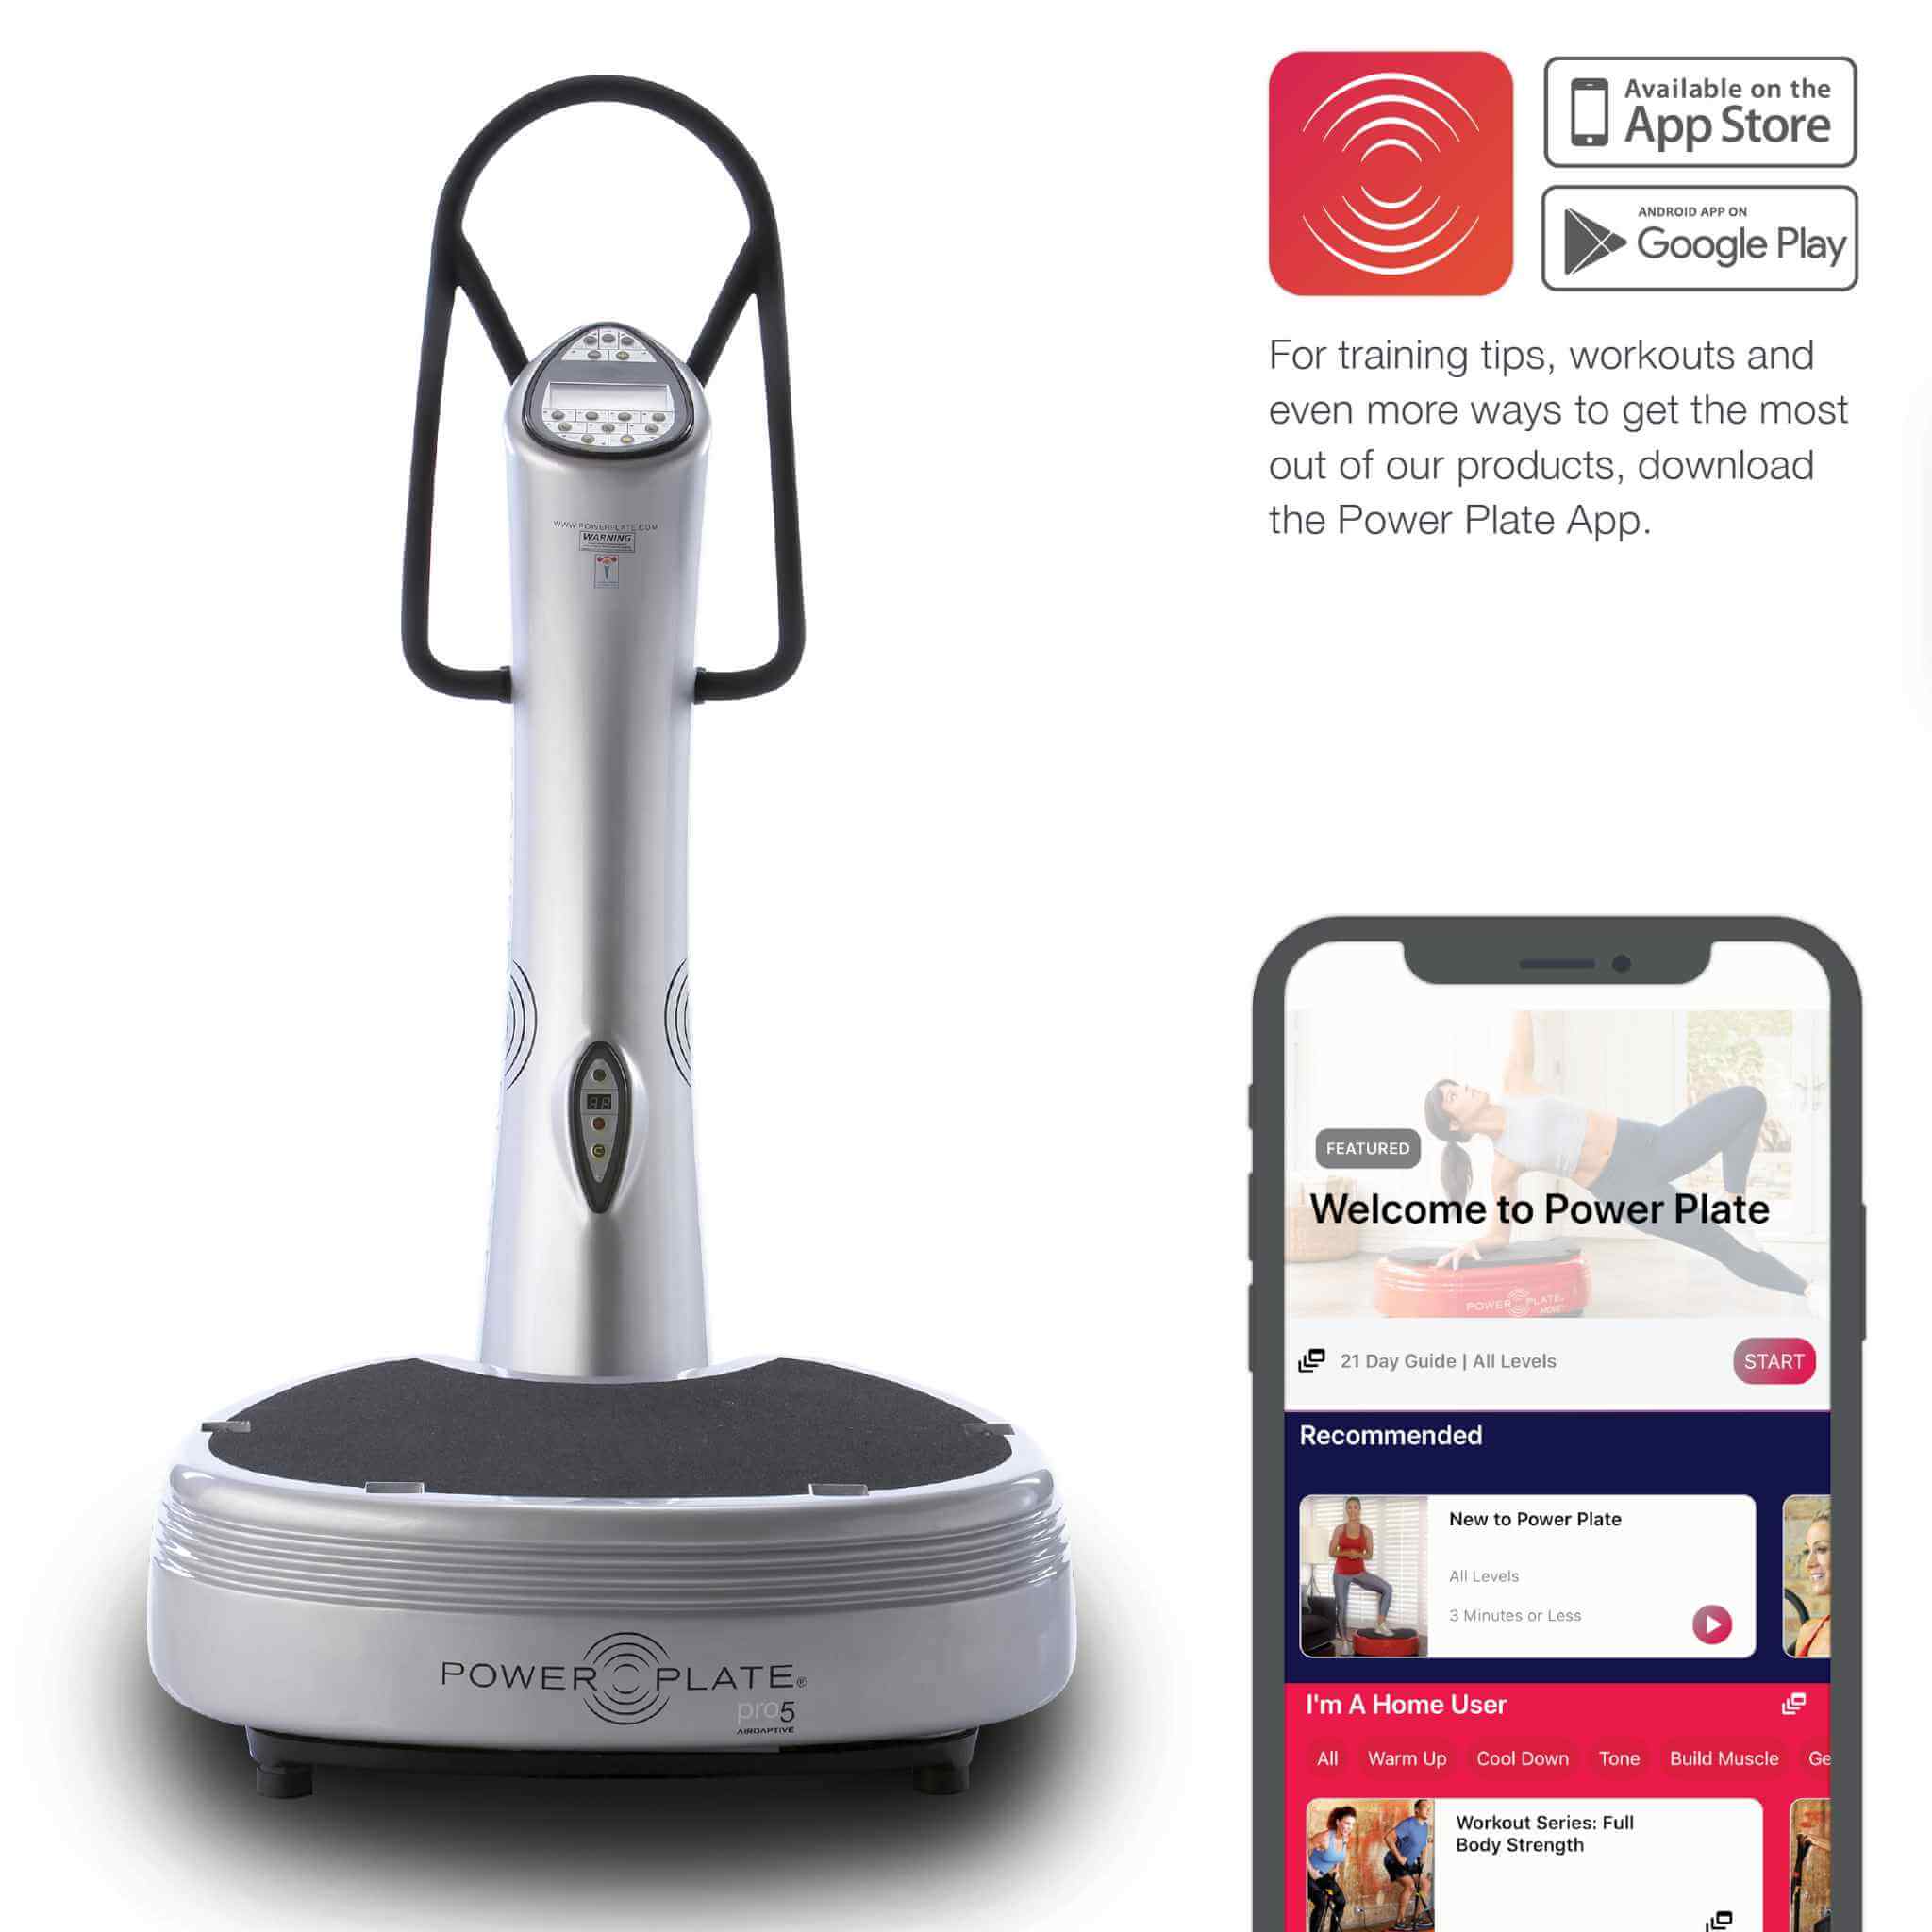 Power Plate Pro5 fitness equipment with vibration technology."